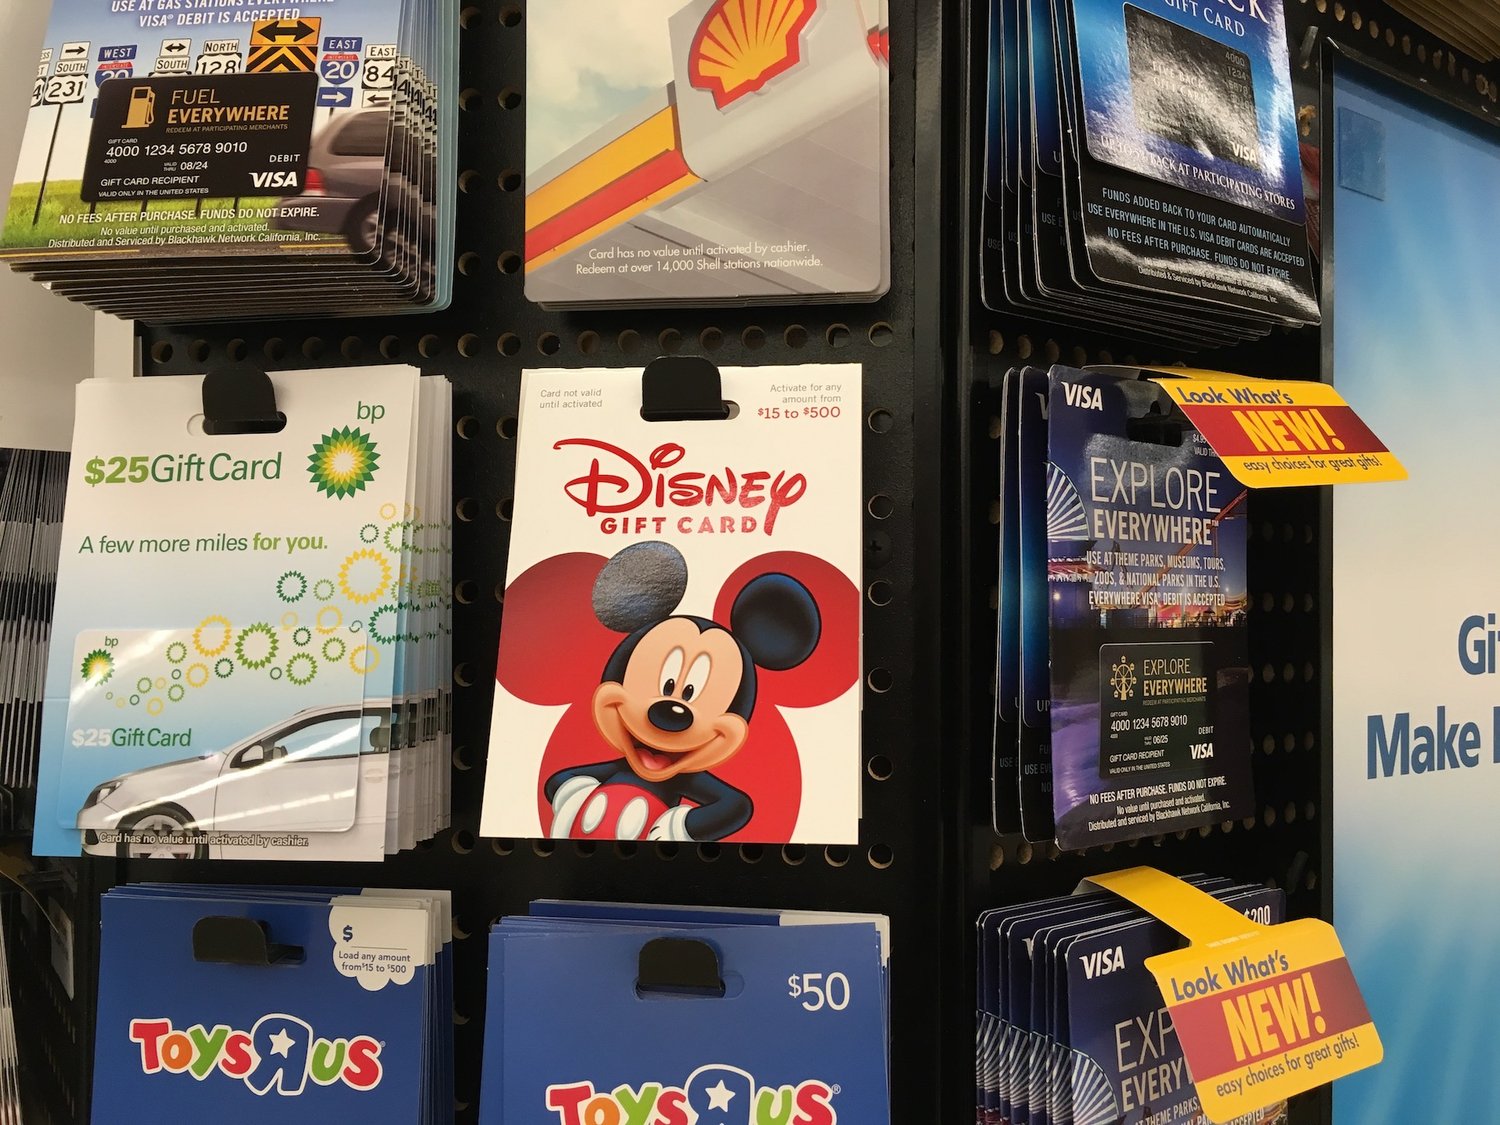 Getting the Most Out of Discount Disney Gift Cards